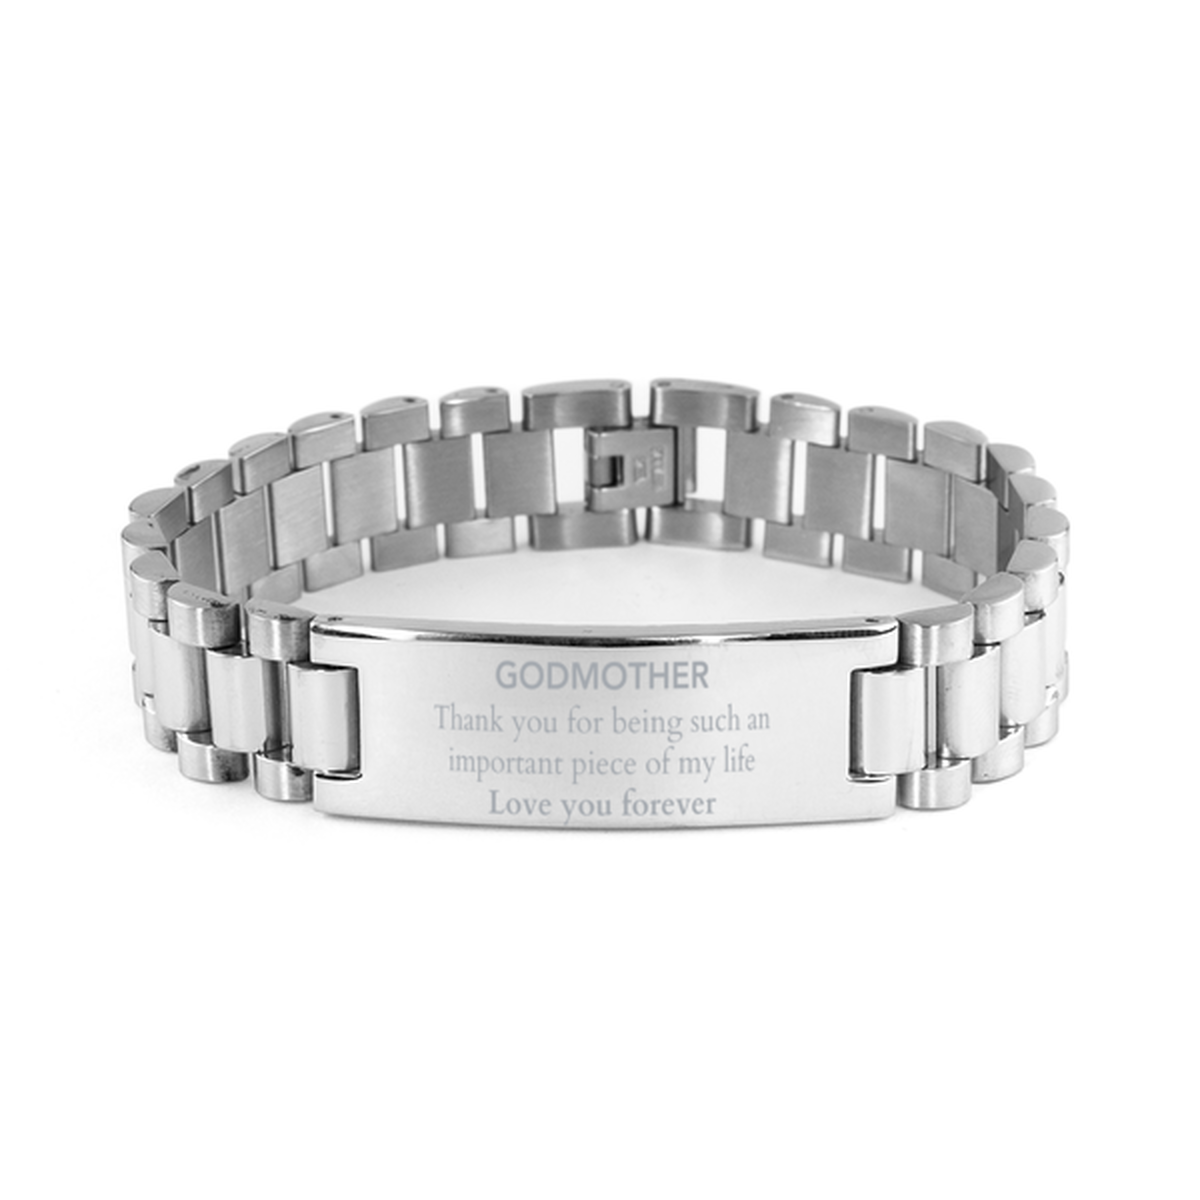 Appropriate Godmother Ladder Stainless Steel Bracelet Epic Birthday Gifts for Godmother Thank you for being such an important piece of my life Godmother Christmas Mothers Fathers Day